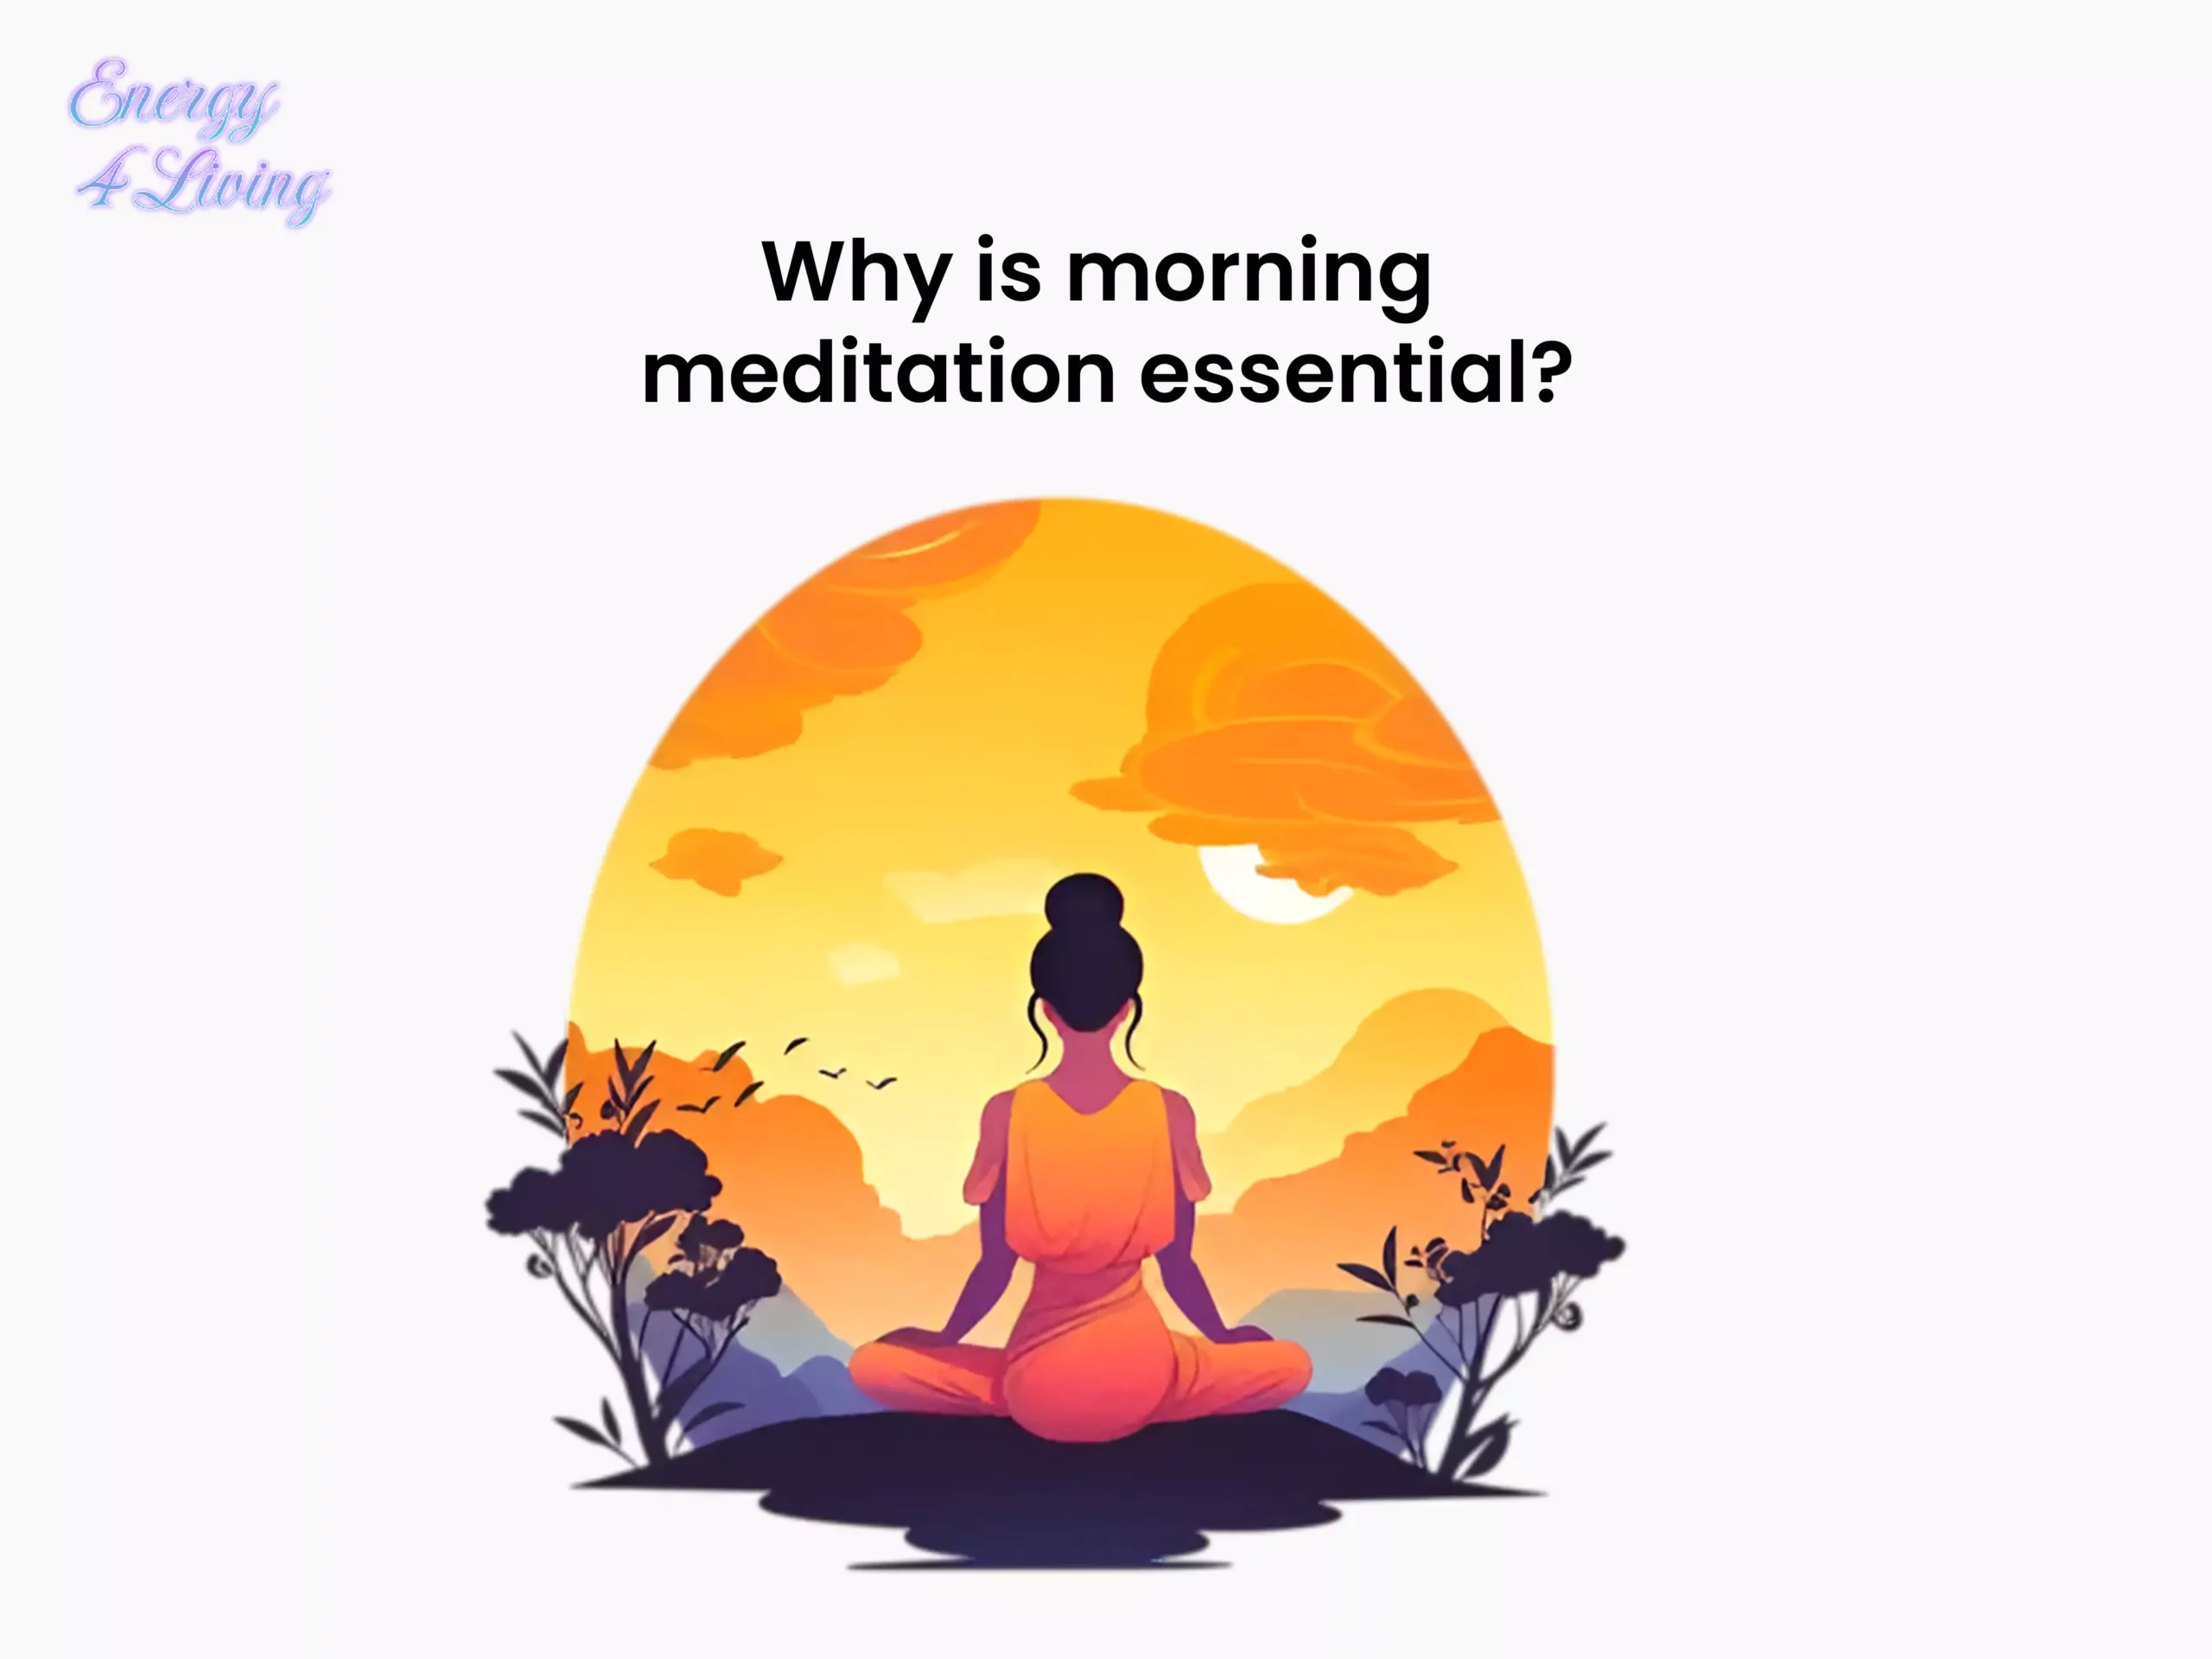 Why is morning meditation essential?